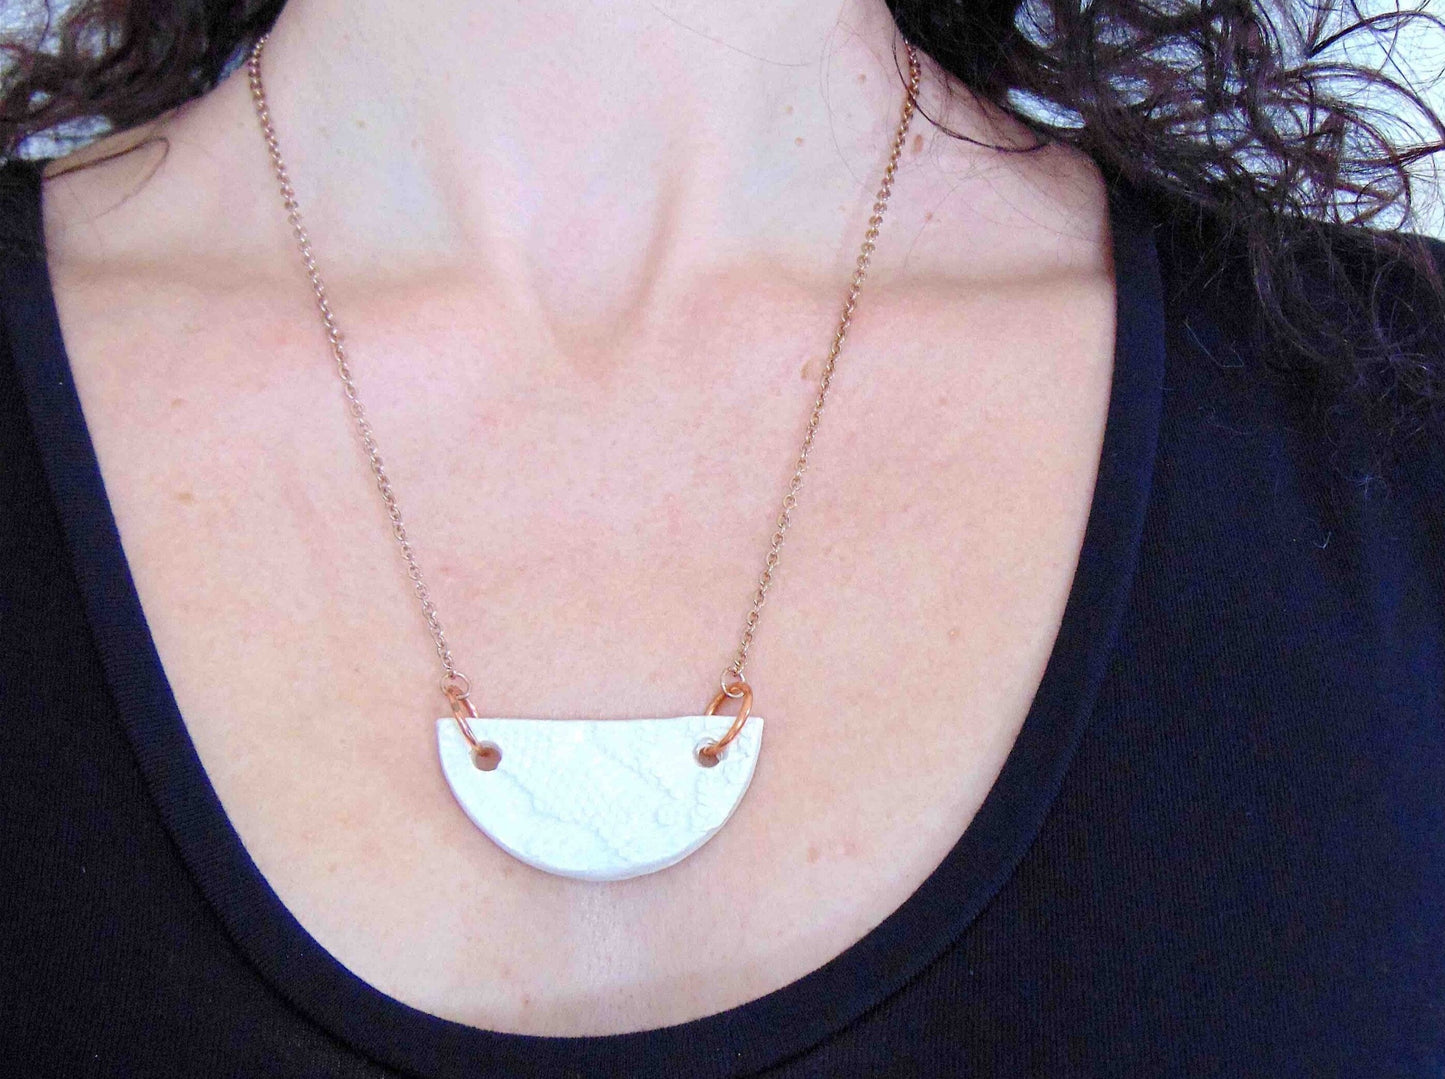 20-inch necklace with off-white half-circle ceramics pendant handmade in Montreal, rose gold-toned stainless steel chain